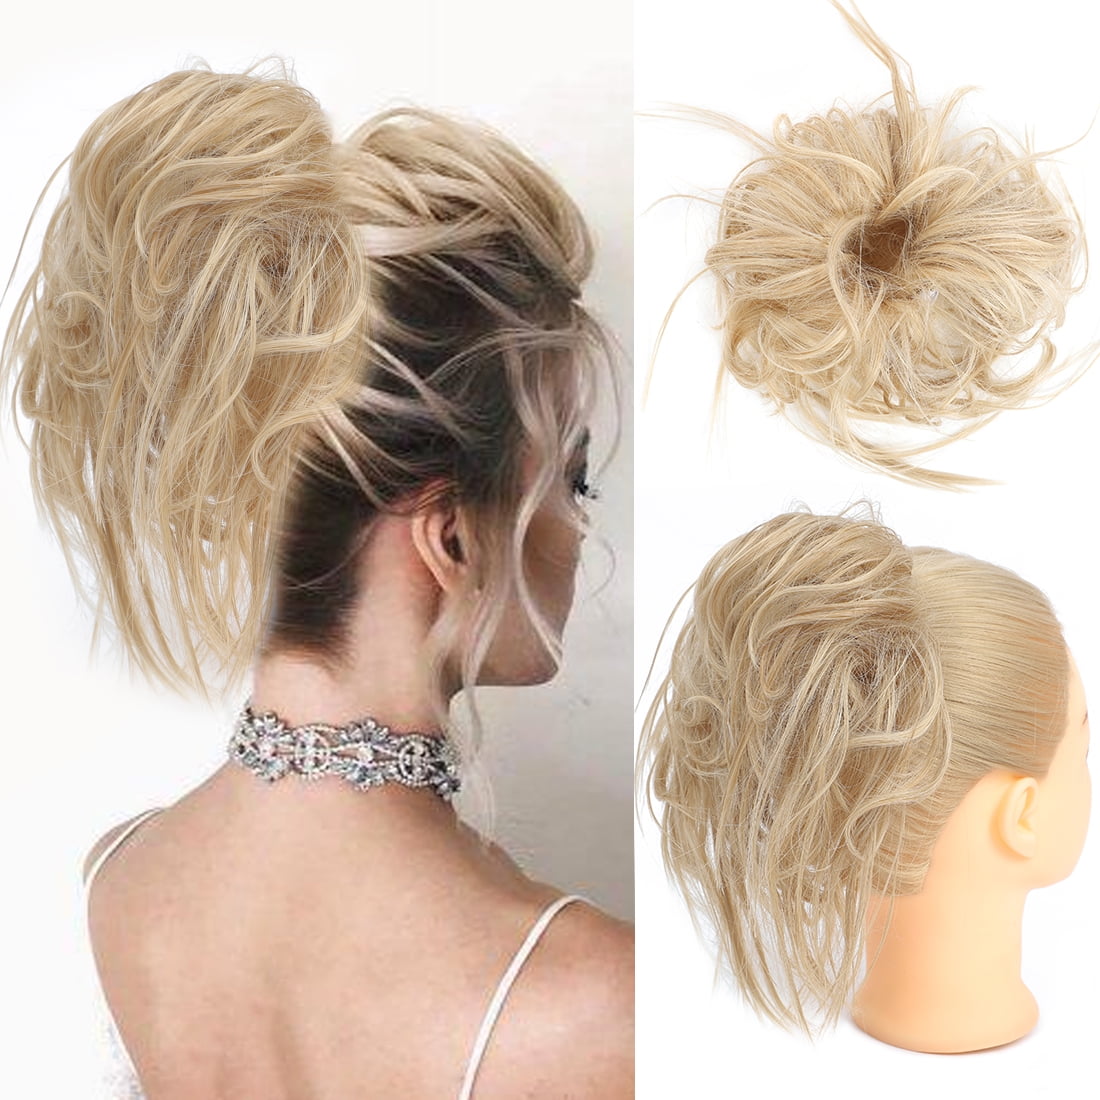 MORICA 1PCS Tousled Updo Messy Bun Hair Piece Extension with Elastic ...